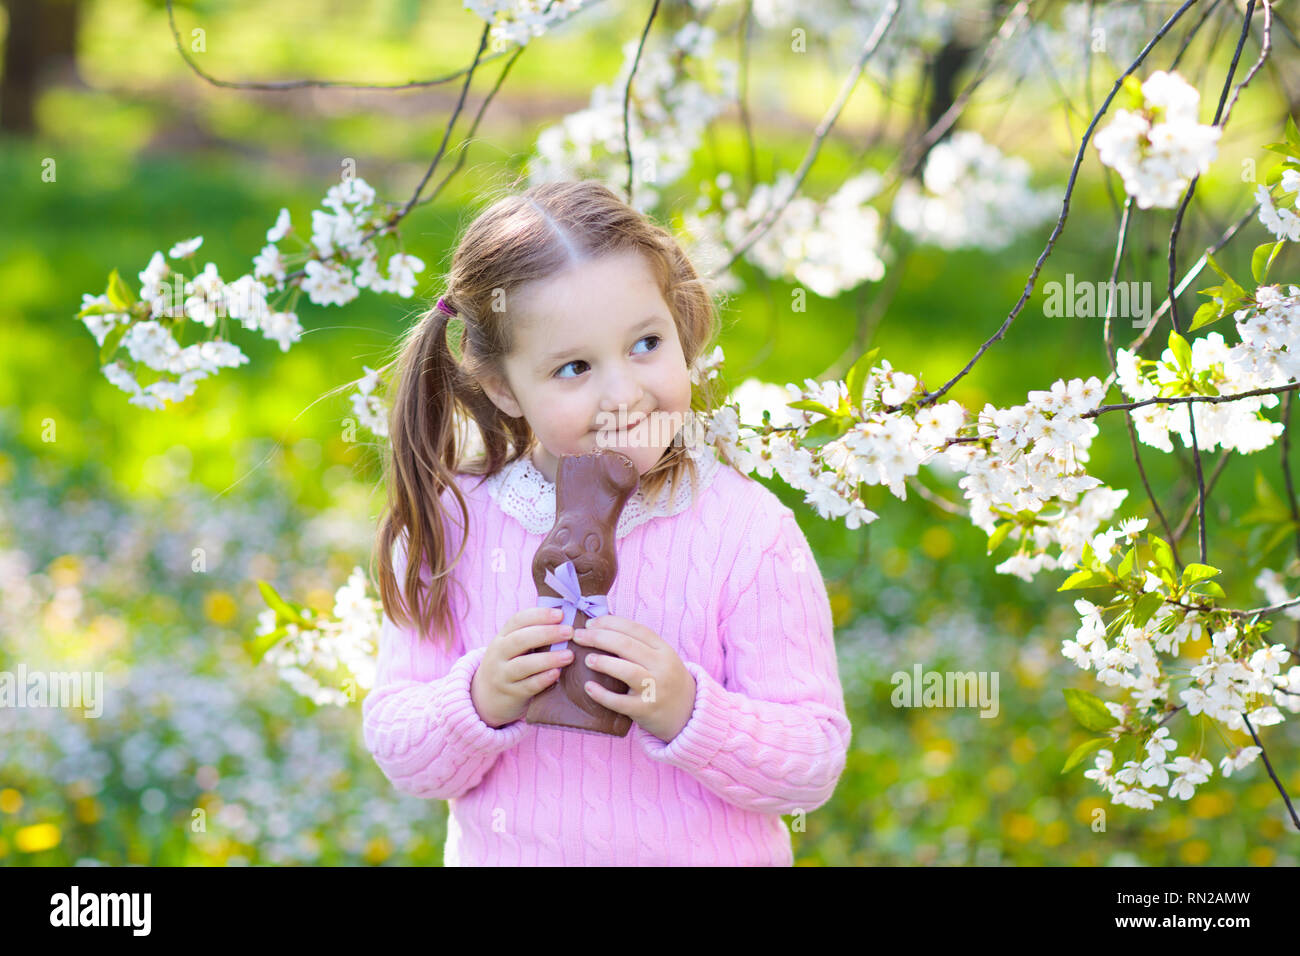 Kids with bunny ears on Easter egg hunt in blooming cherry blossom garden. Little girl eating chocolate rabbit. Spring flowers and eggs basket in frui Stock Photo